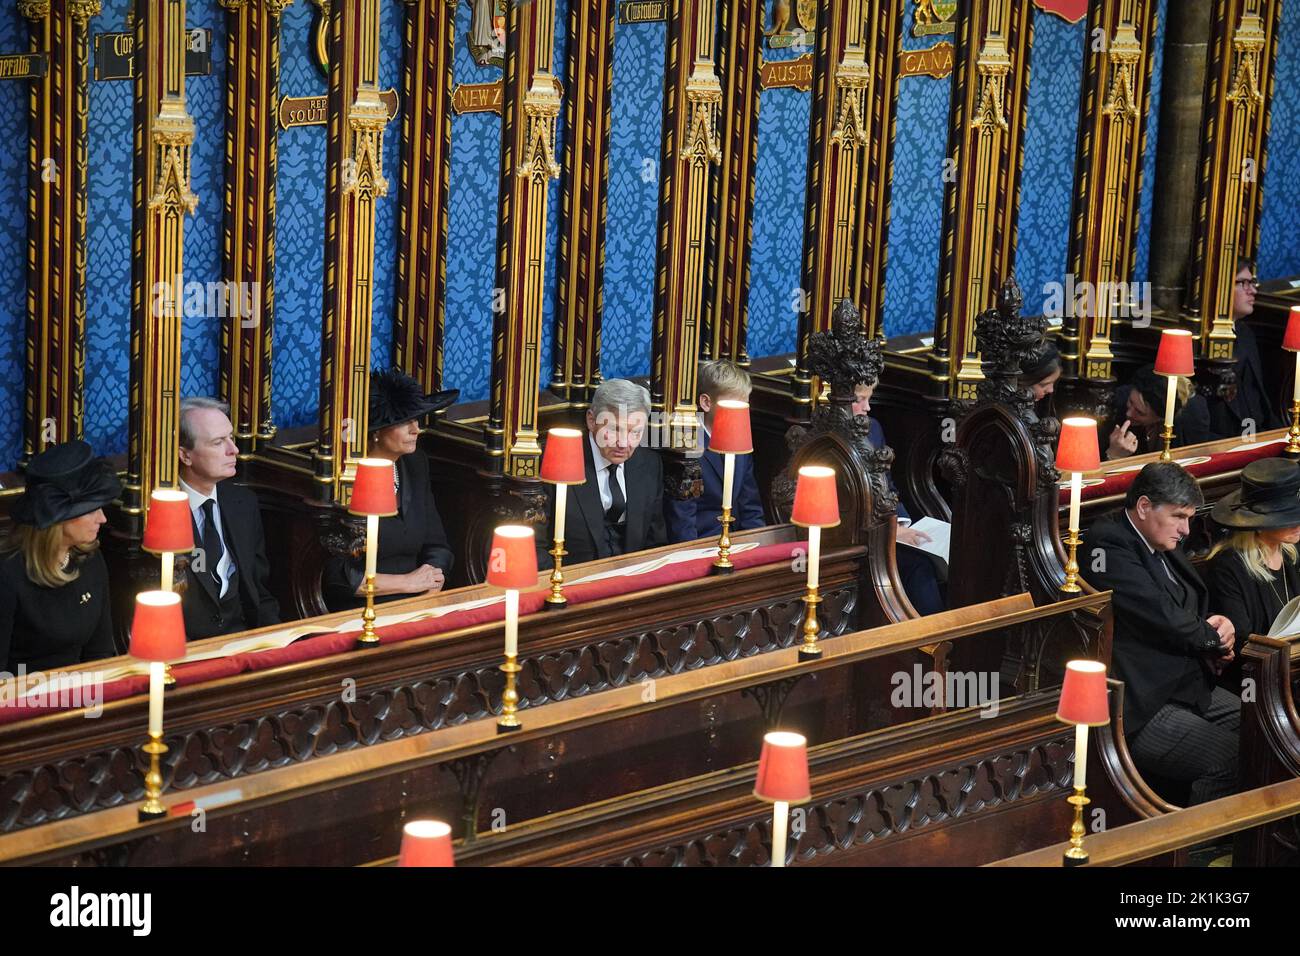 Carole Middleton (third from left) and Michael Middleton (fourth from left) at the State Funeral of Queen Elizabeth II, held at Westminster Abbey, London. Picture date: Monday September 19, 2022. Stock Photo